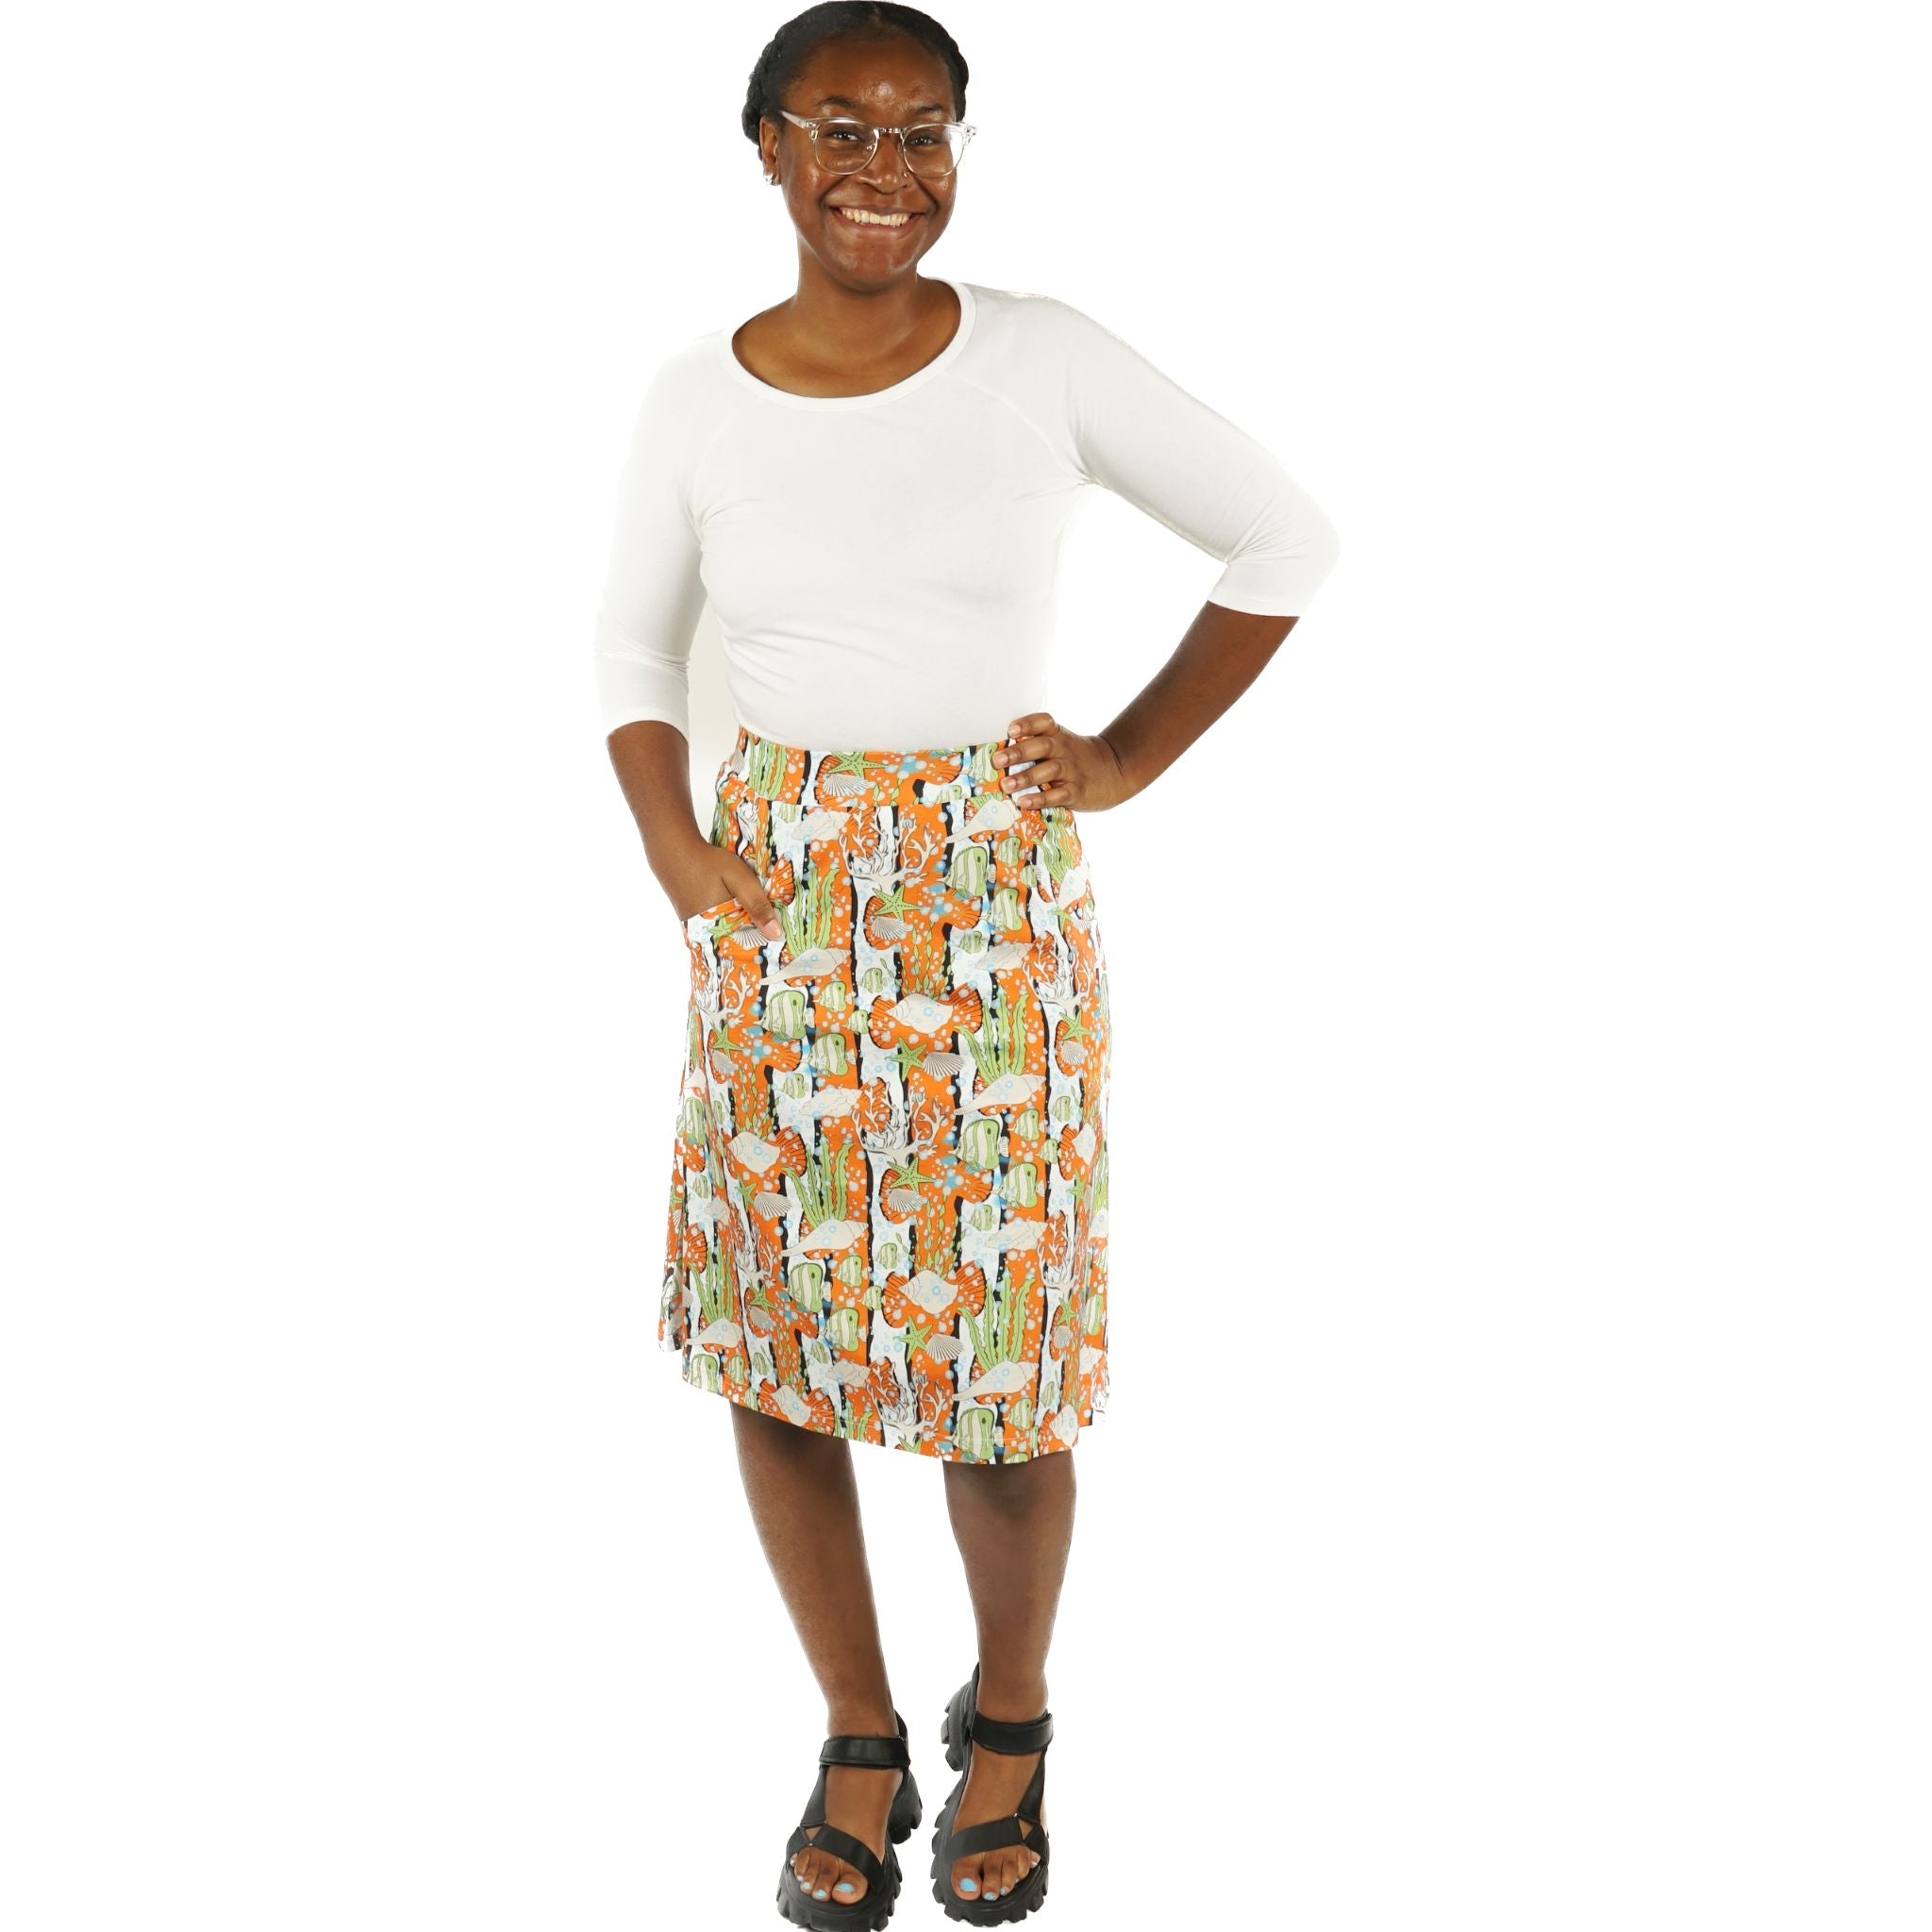 Coral Reef A-Line Skirt